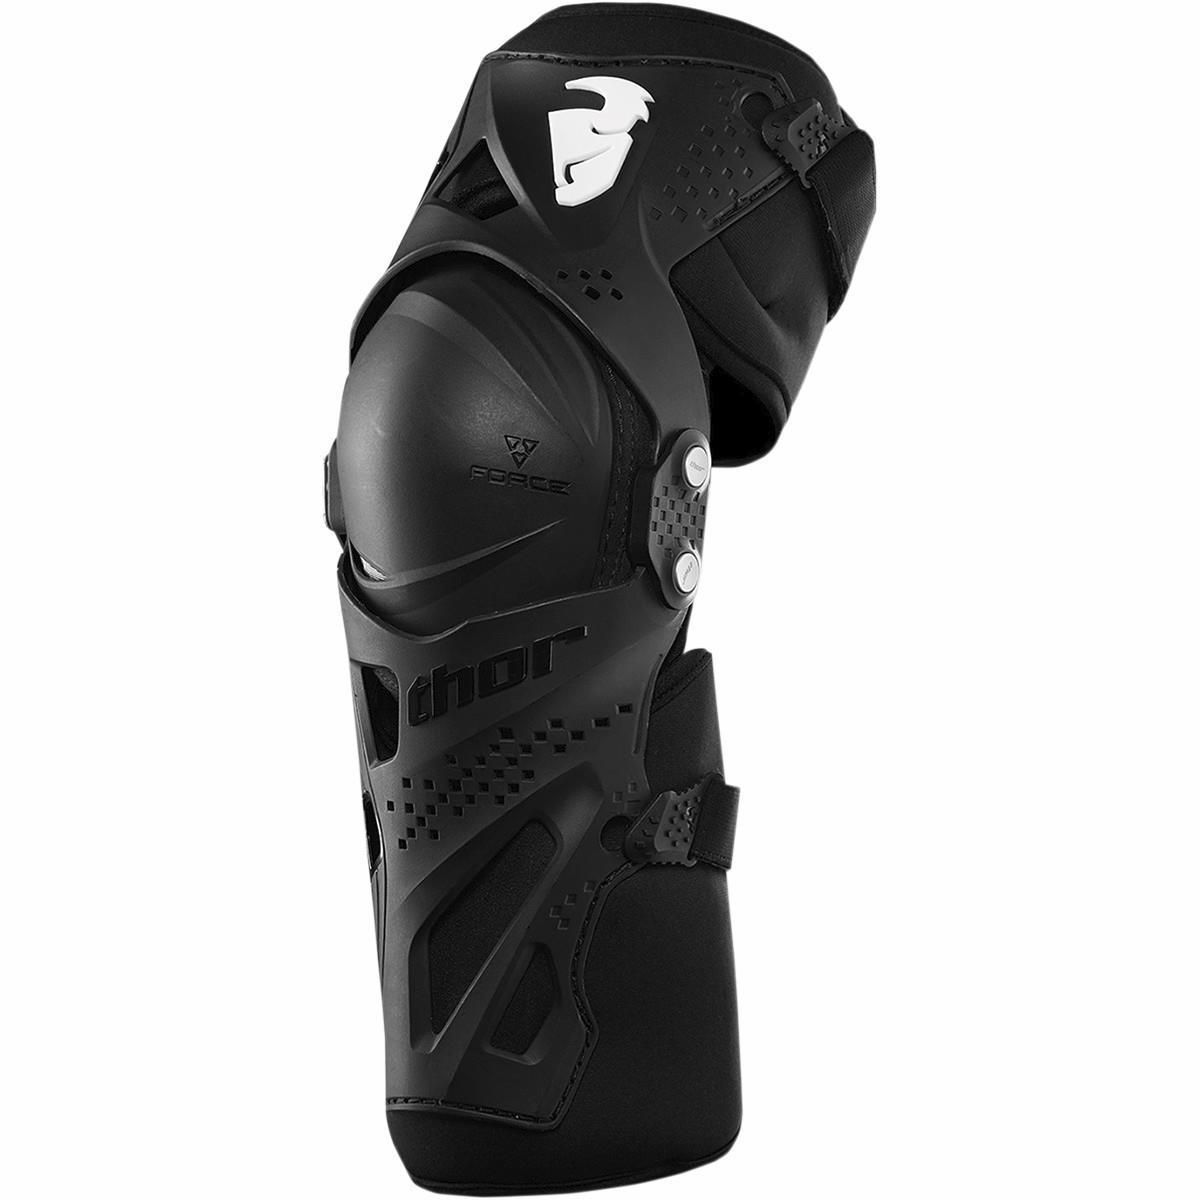 2G8D-THOR-27040359 Force XP Knee Guards